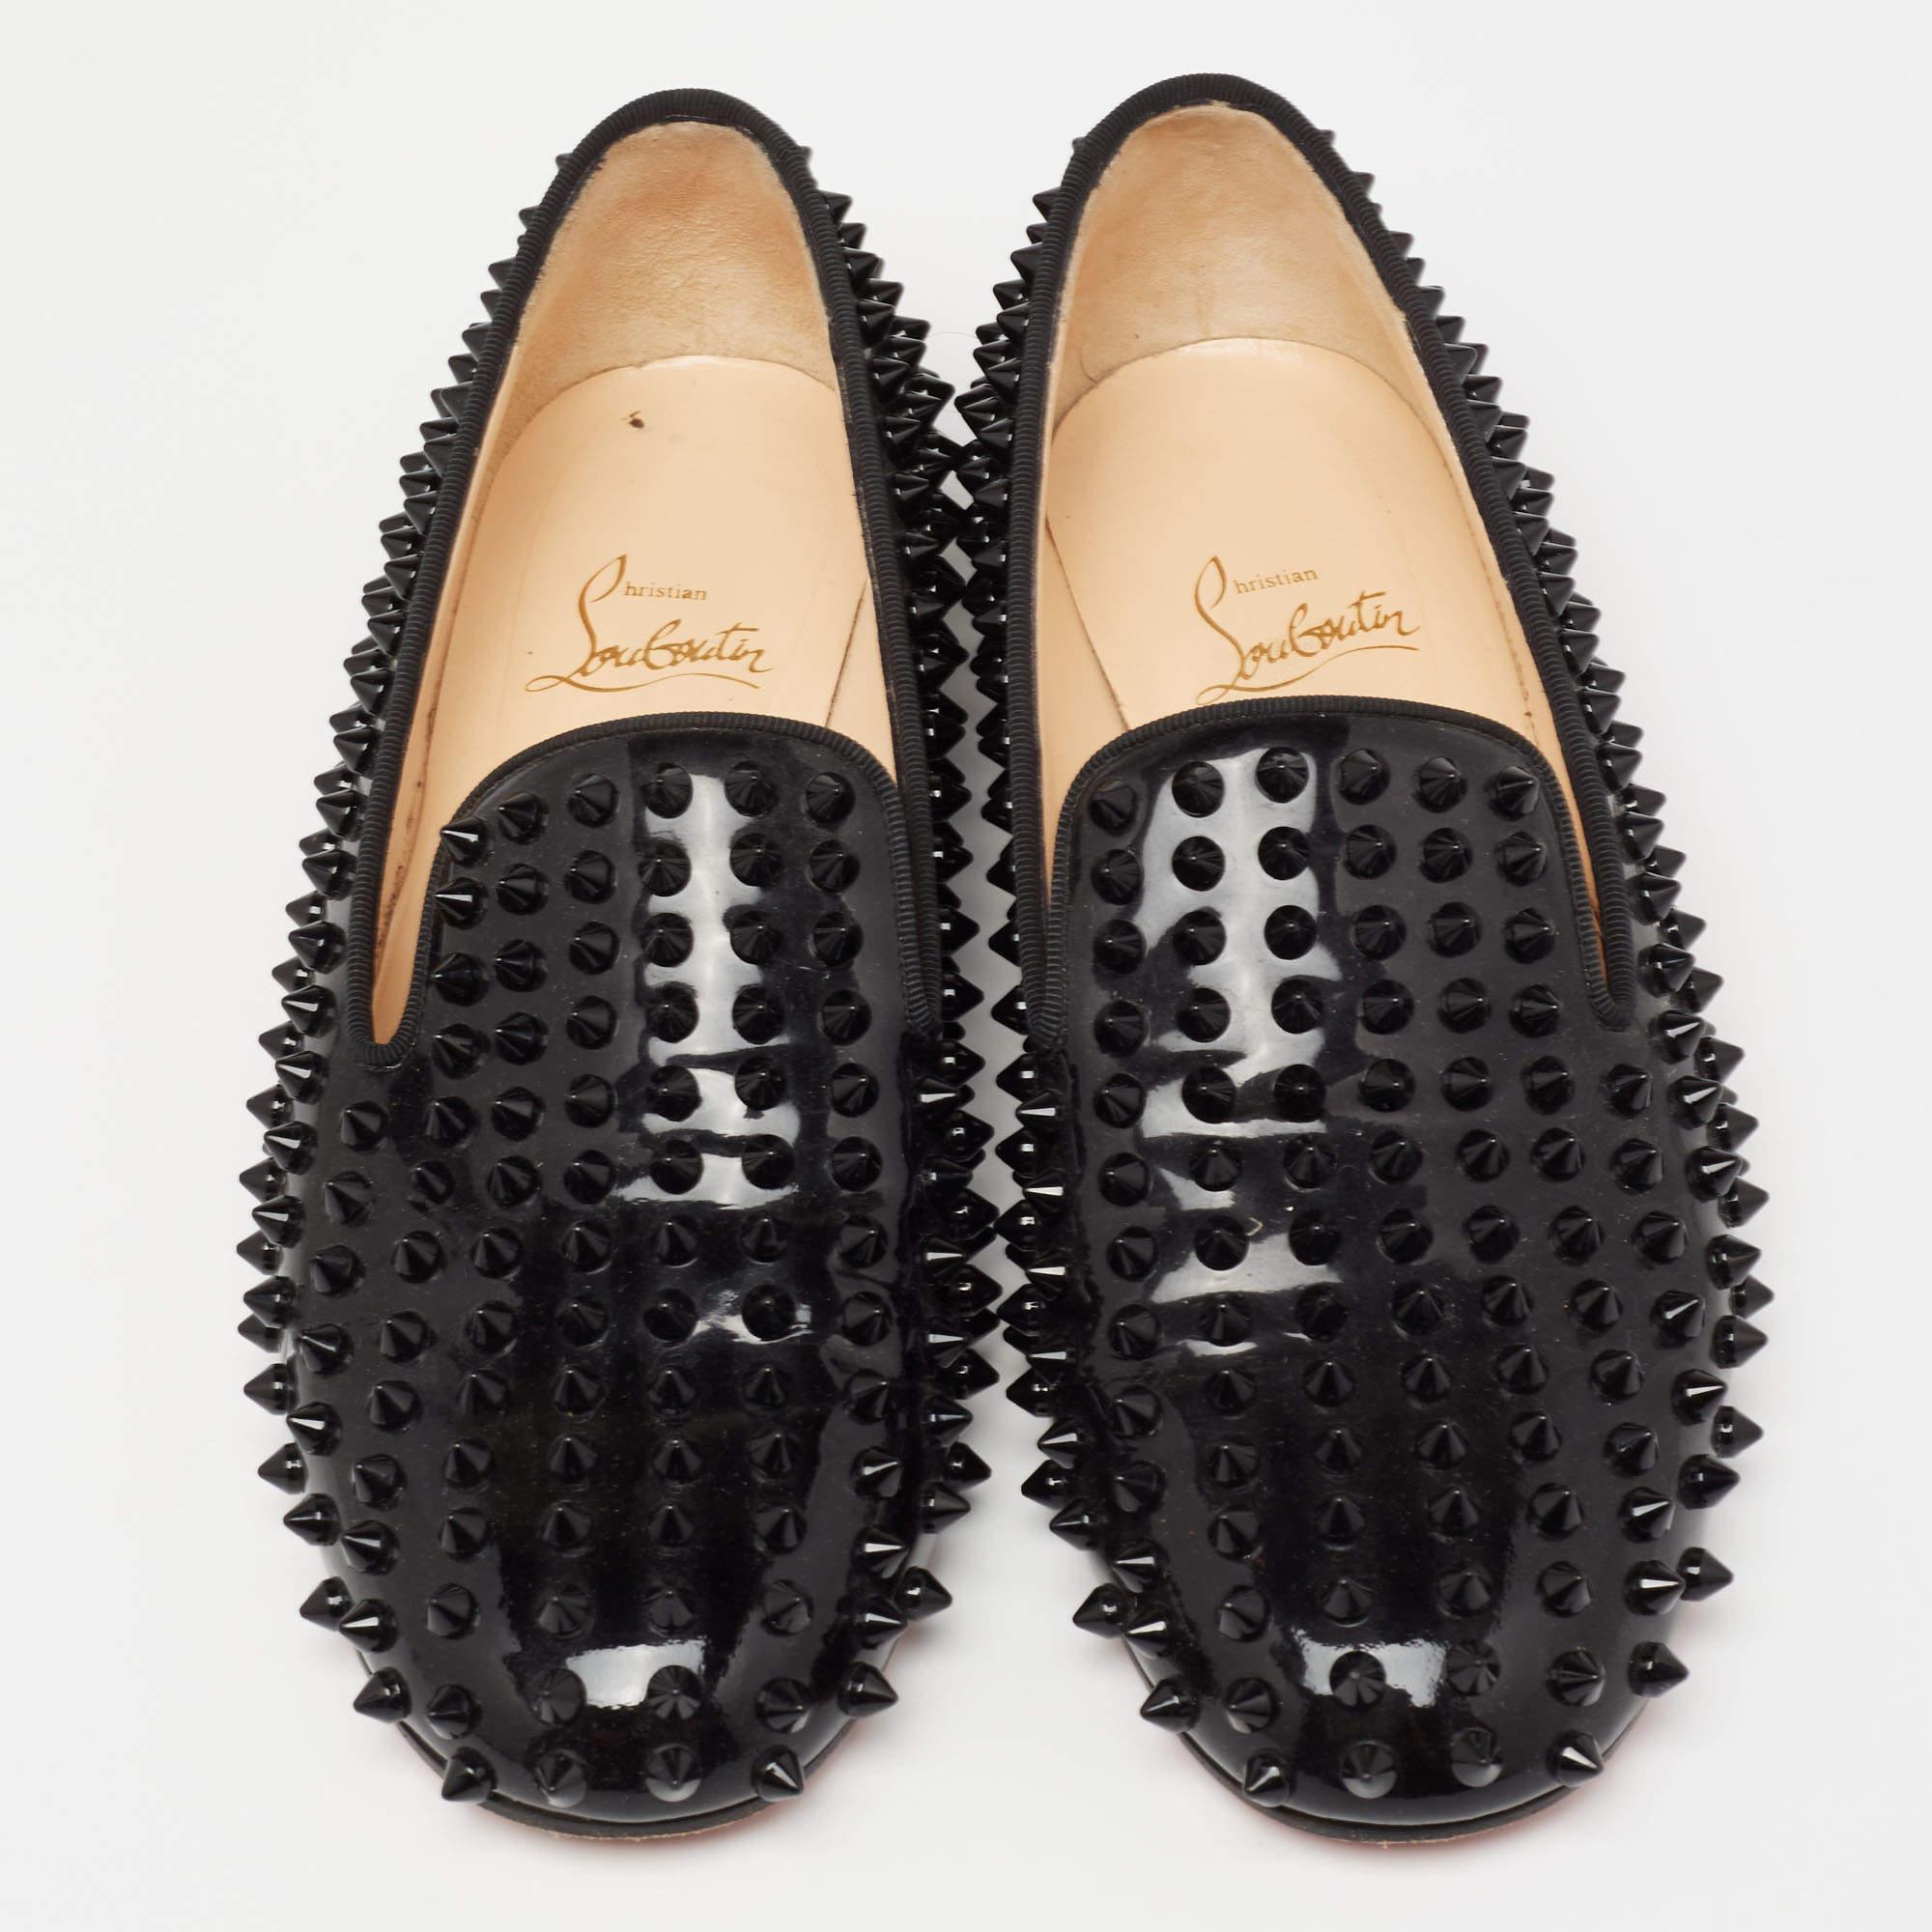 Christian Louboutin Patent Leather Dandelion Spikes Smoking Slippers Size 37 For Sale 3